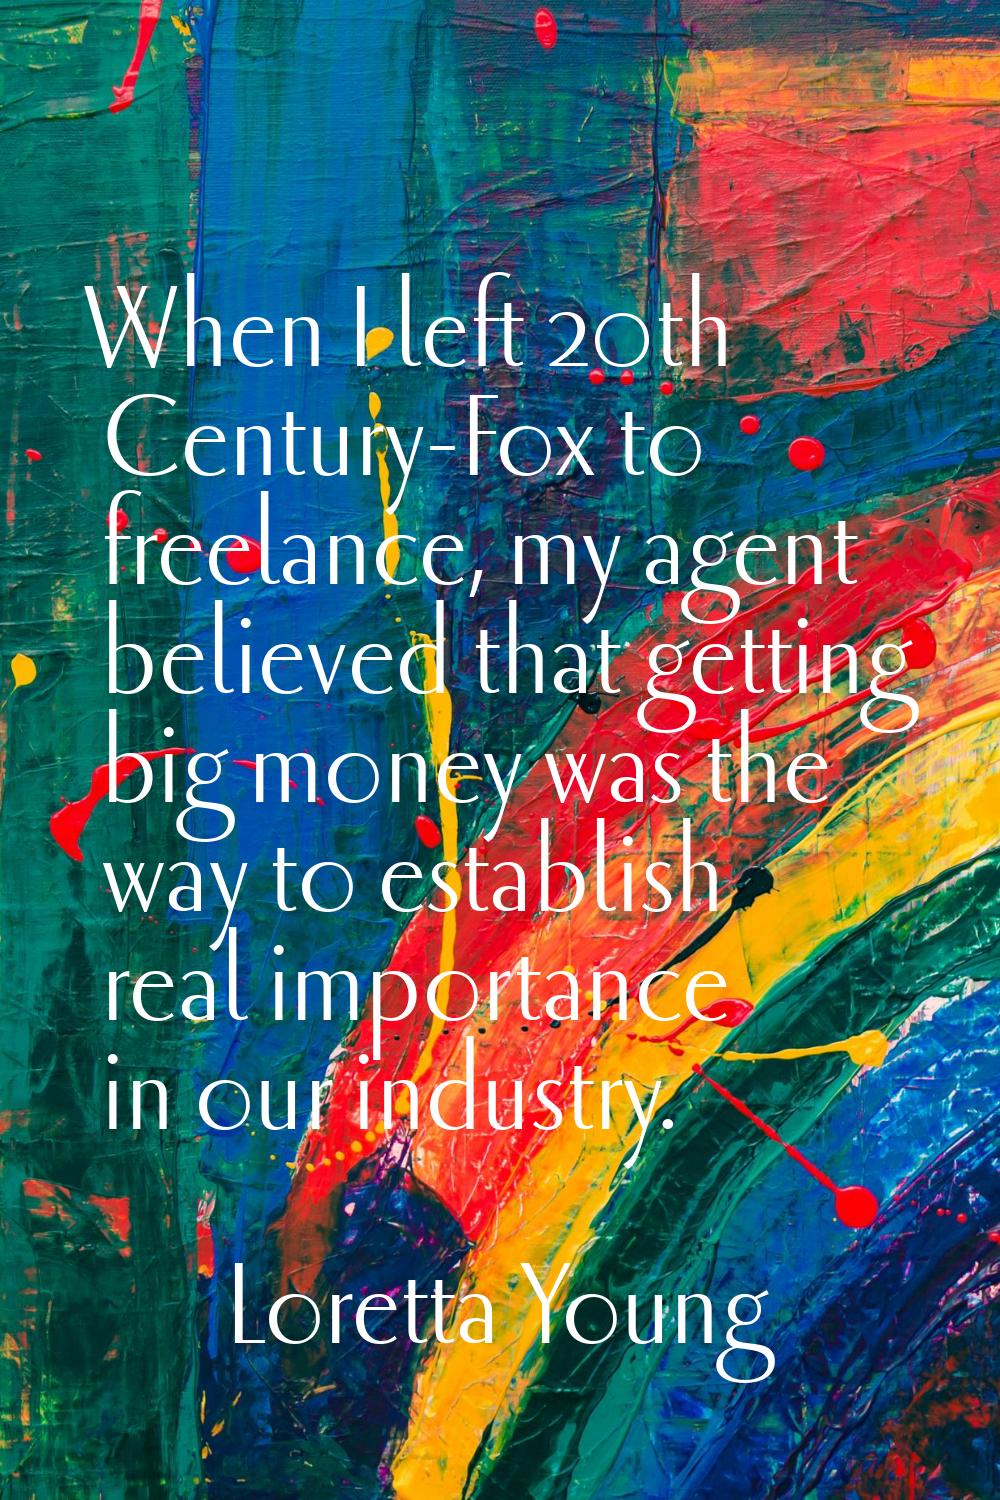 When I left 20th Century-Fox to freelance, my agent believed that getting big money was the way to 